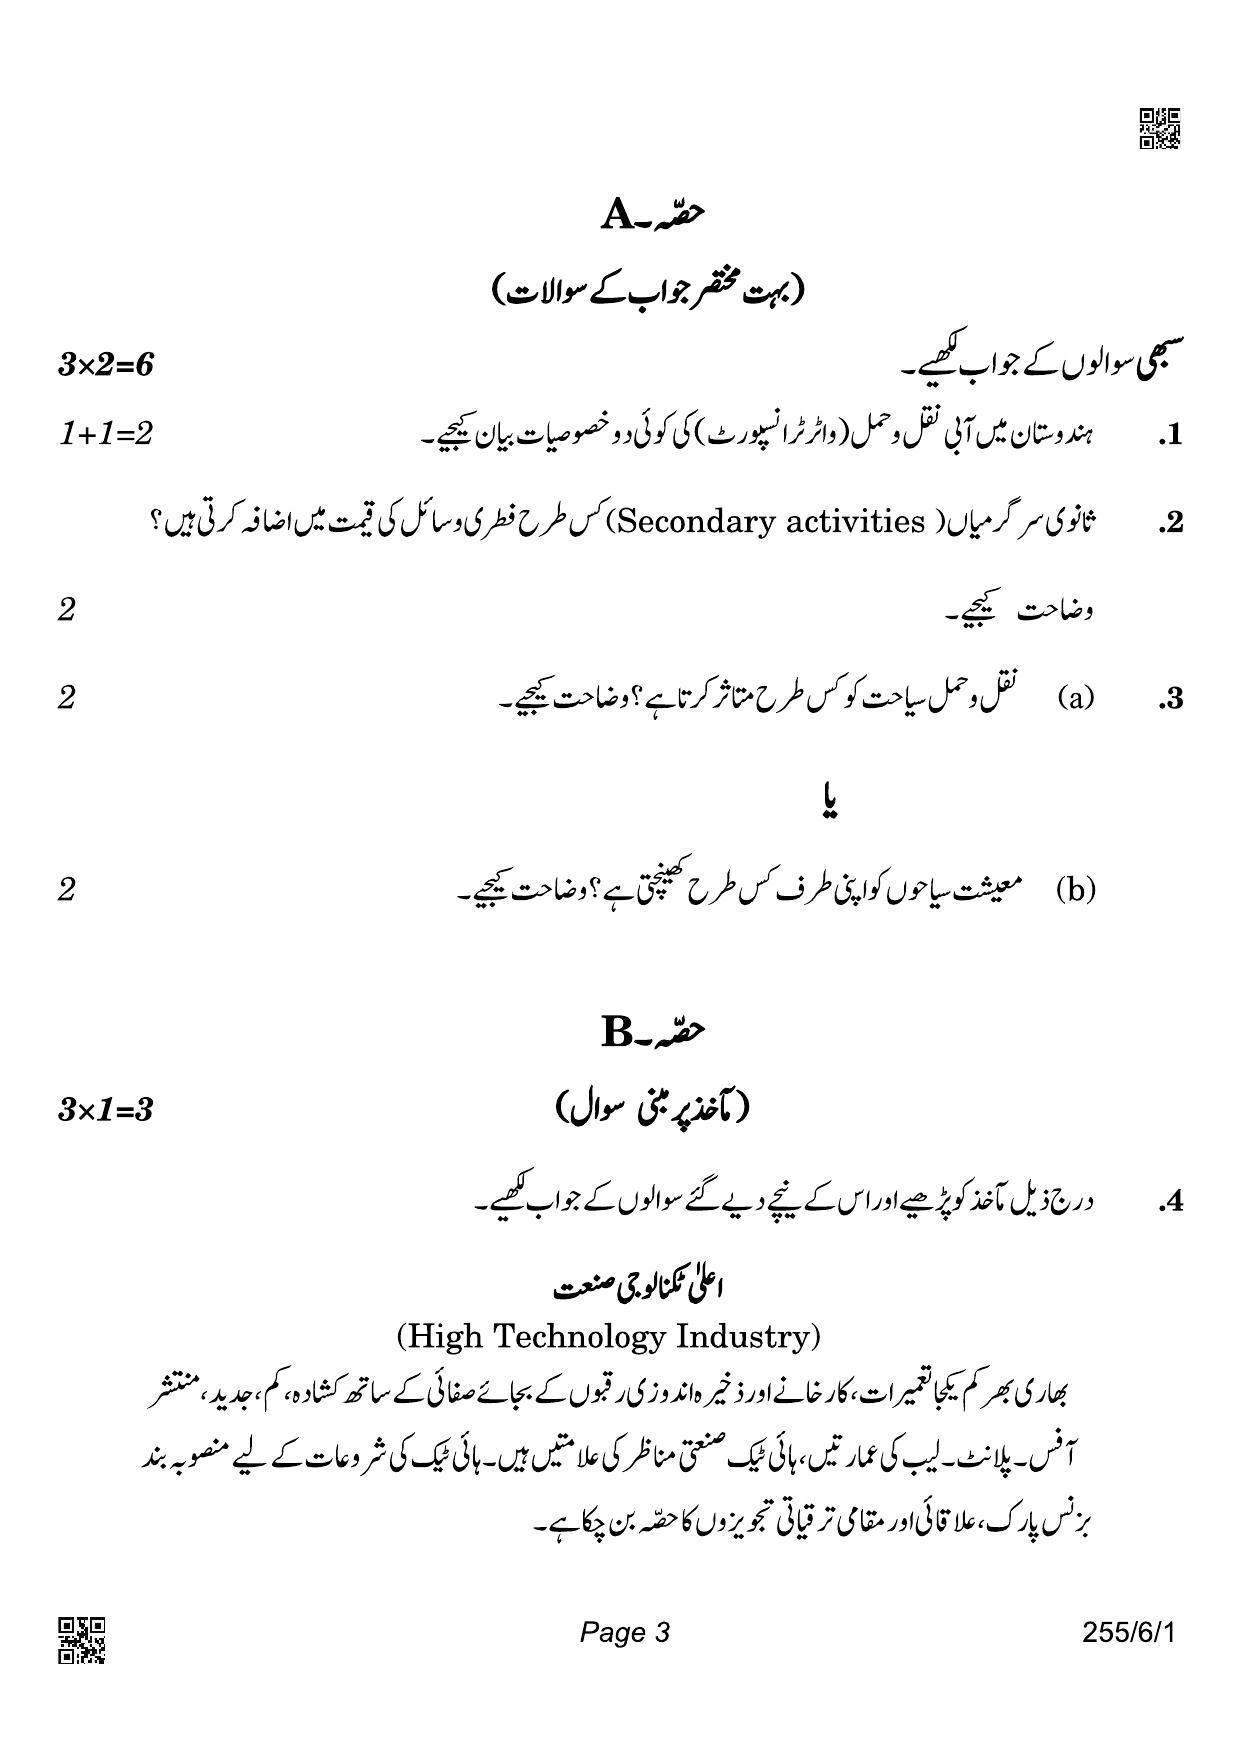 CBSE Class 12 255-6-1 Geography Urdu 2022 Compartment Question Paper - Page 3